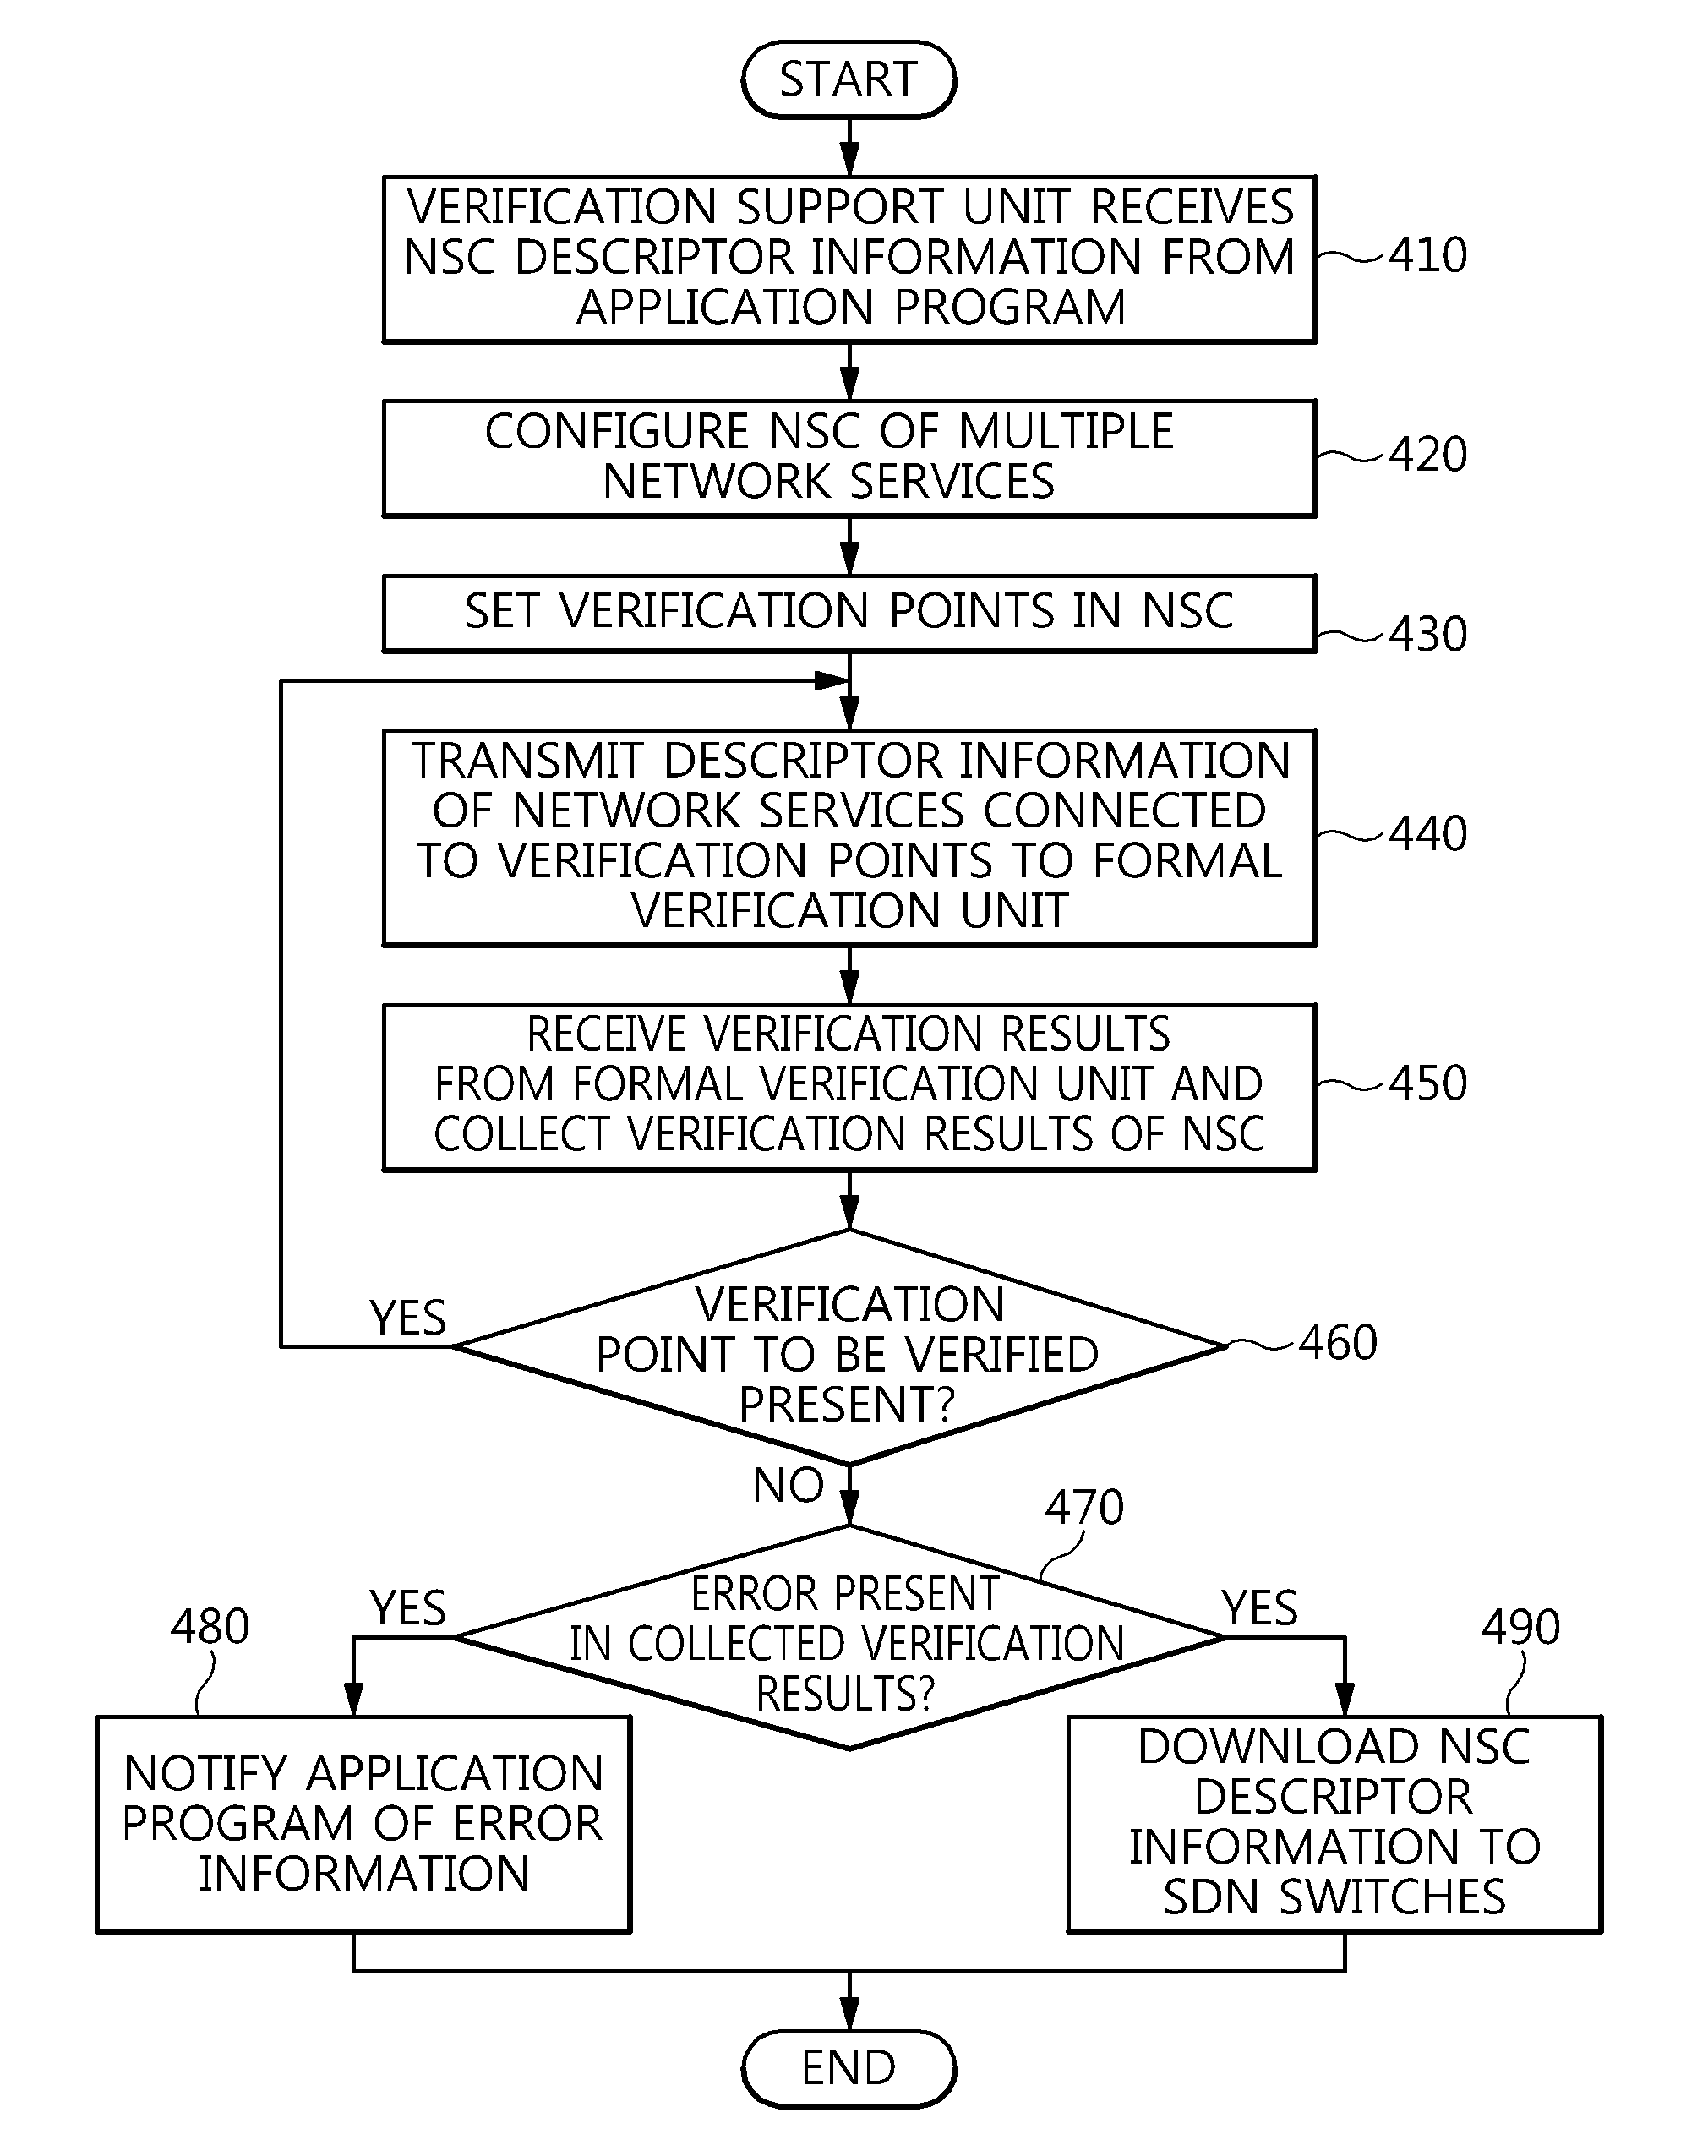 Verification support apparatus and method for formal verification of network service chain in software-defined networking environment, and formal verification apparatus having verification support apparatus